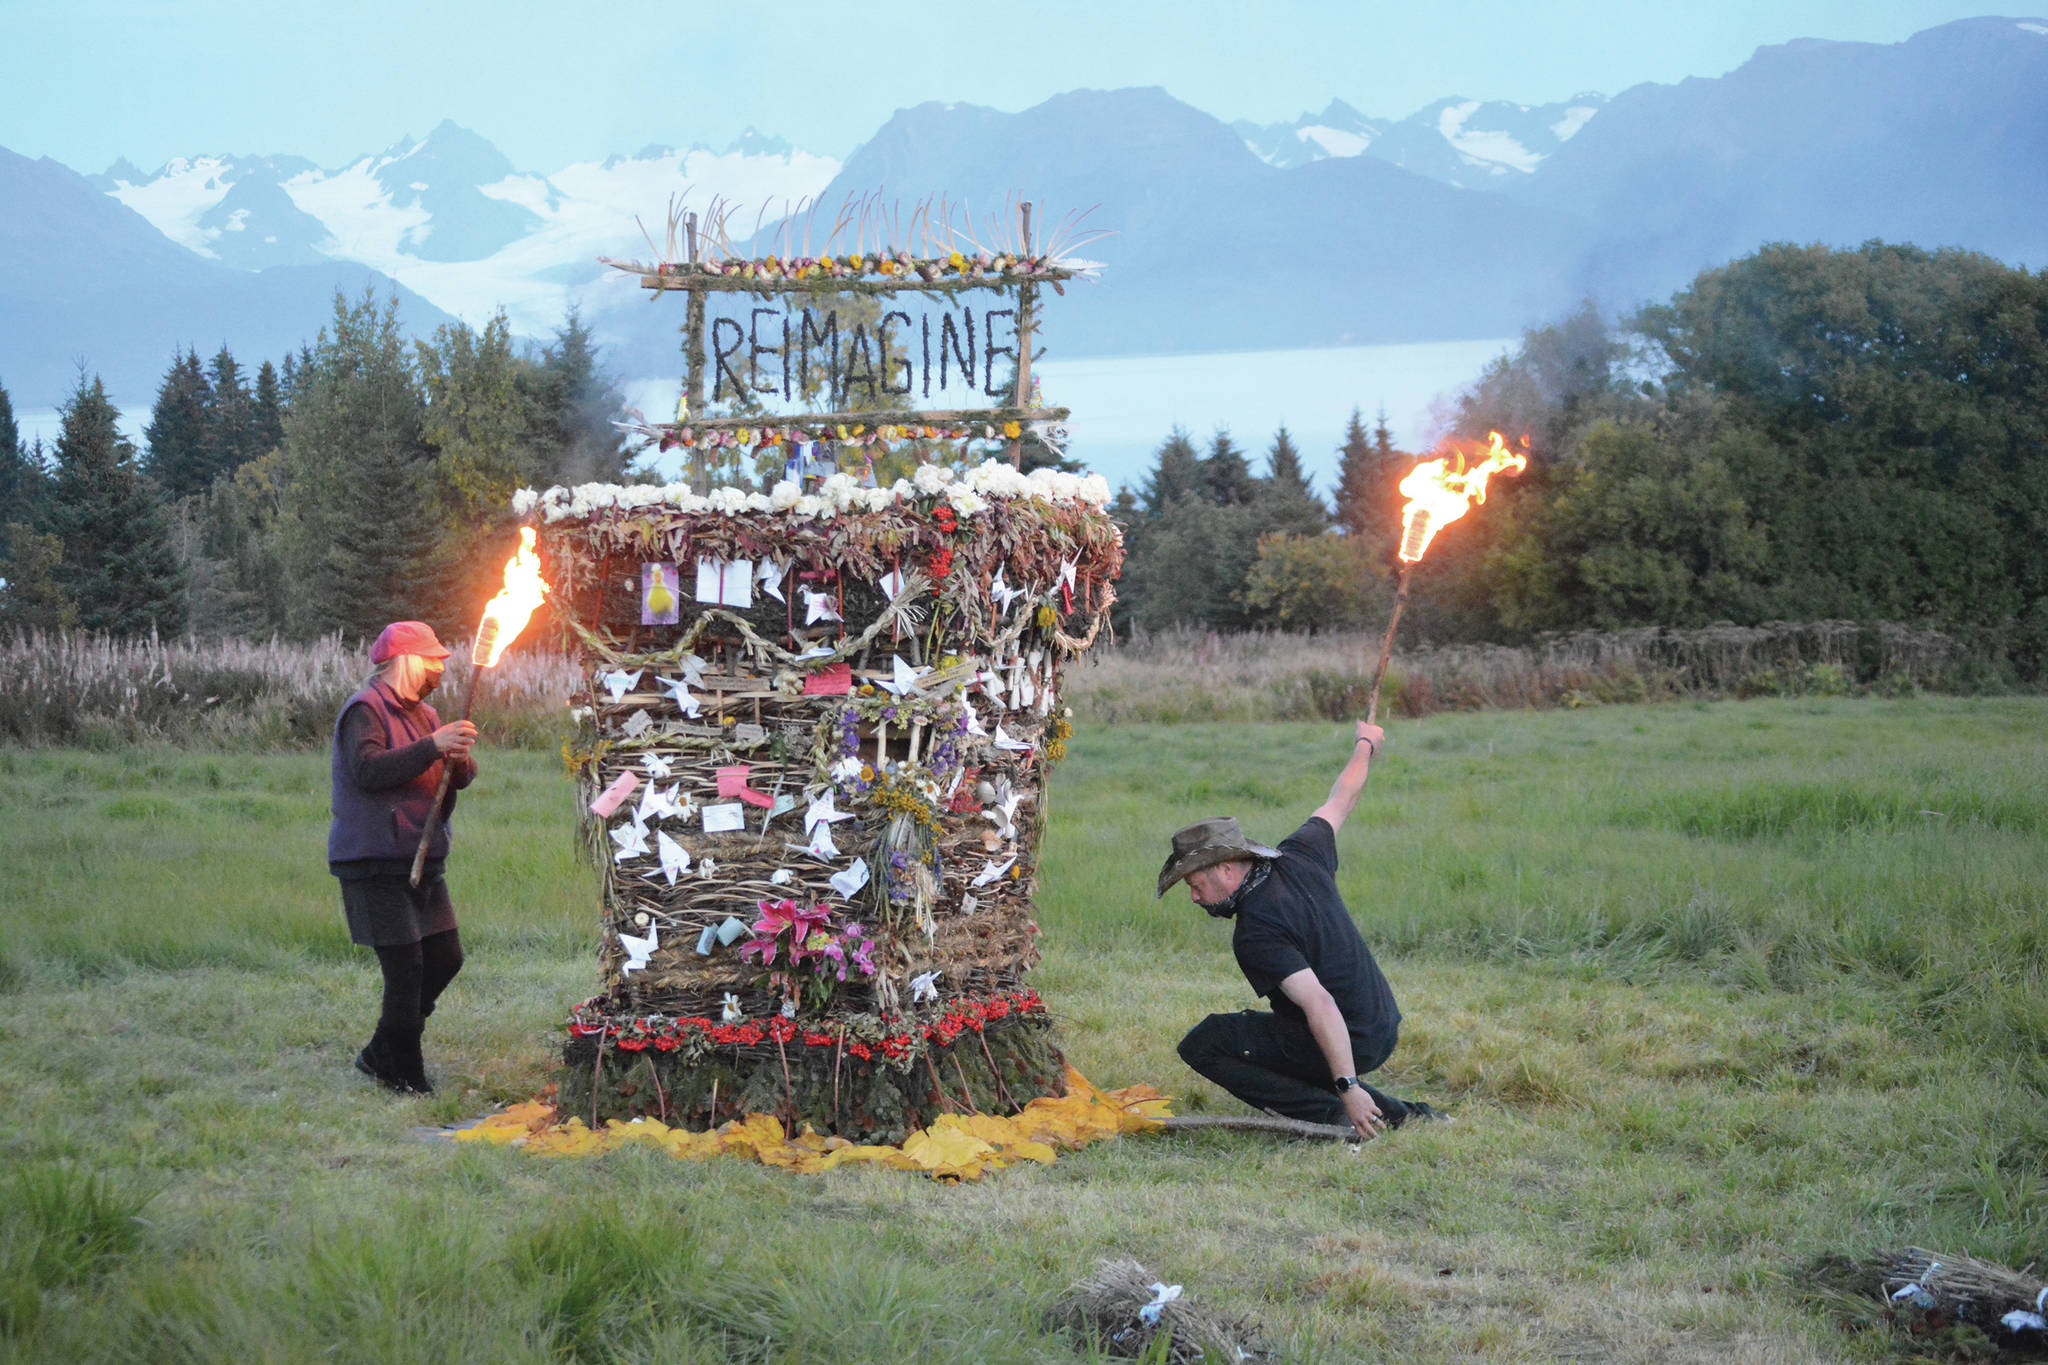 Mavis Muller, left, and Matt Steffy, right, light on fire “Reimagine,” the 17th annual Burning Basket, in a field on Sunday, Sept. 13, near Homer. Artist and coordinator Muller intended to broadcast live on Facebook and YouTube the burning of the basket, but because of technical difficulties that didn’t happen. “Burning Basket teaches how to let go of expectations and accept the present moment,” Muller wrote in a text message. “Technology is fickle. The basket, however, did exactly what it promised to do. It helod our collective burderns, our memorials, our joys, sadness, fear, and dispersed all of our good intentions in a plume of smoke, sparks and flames.” (Photo by Michael Armstrong/Homer News)